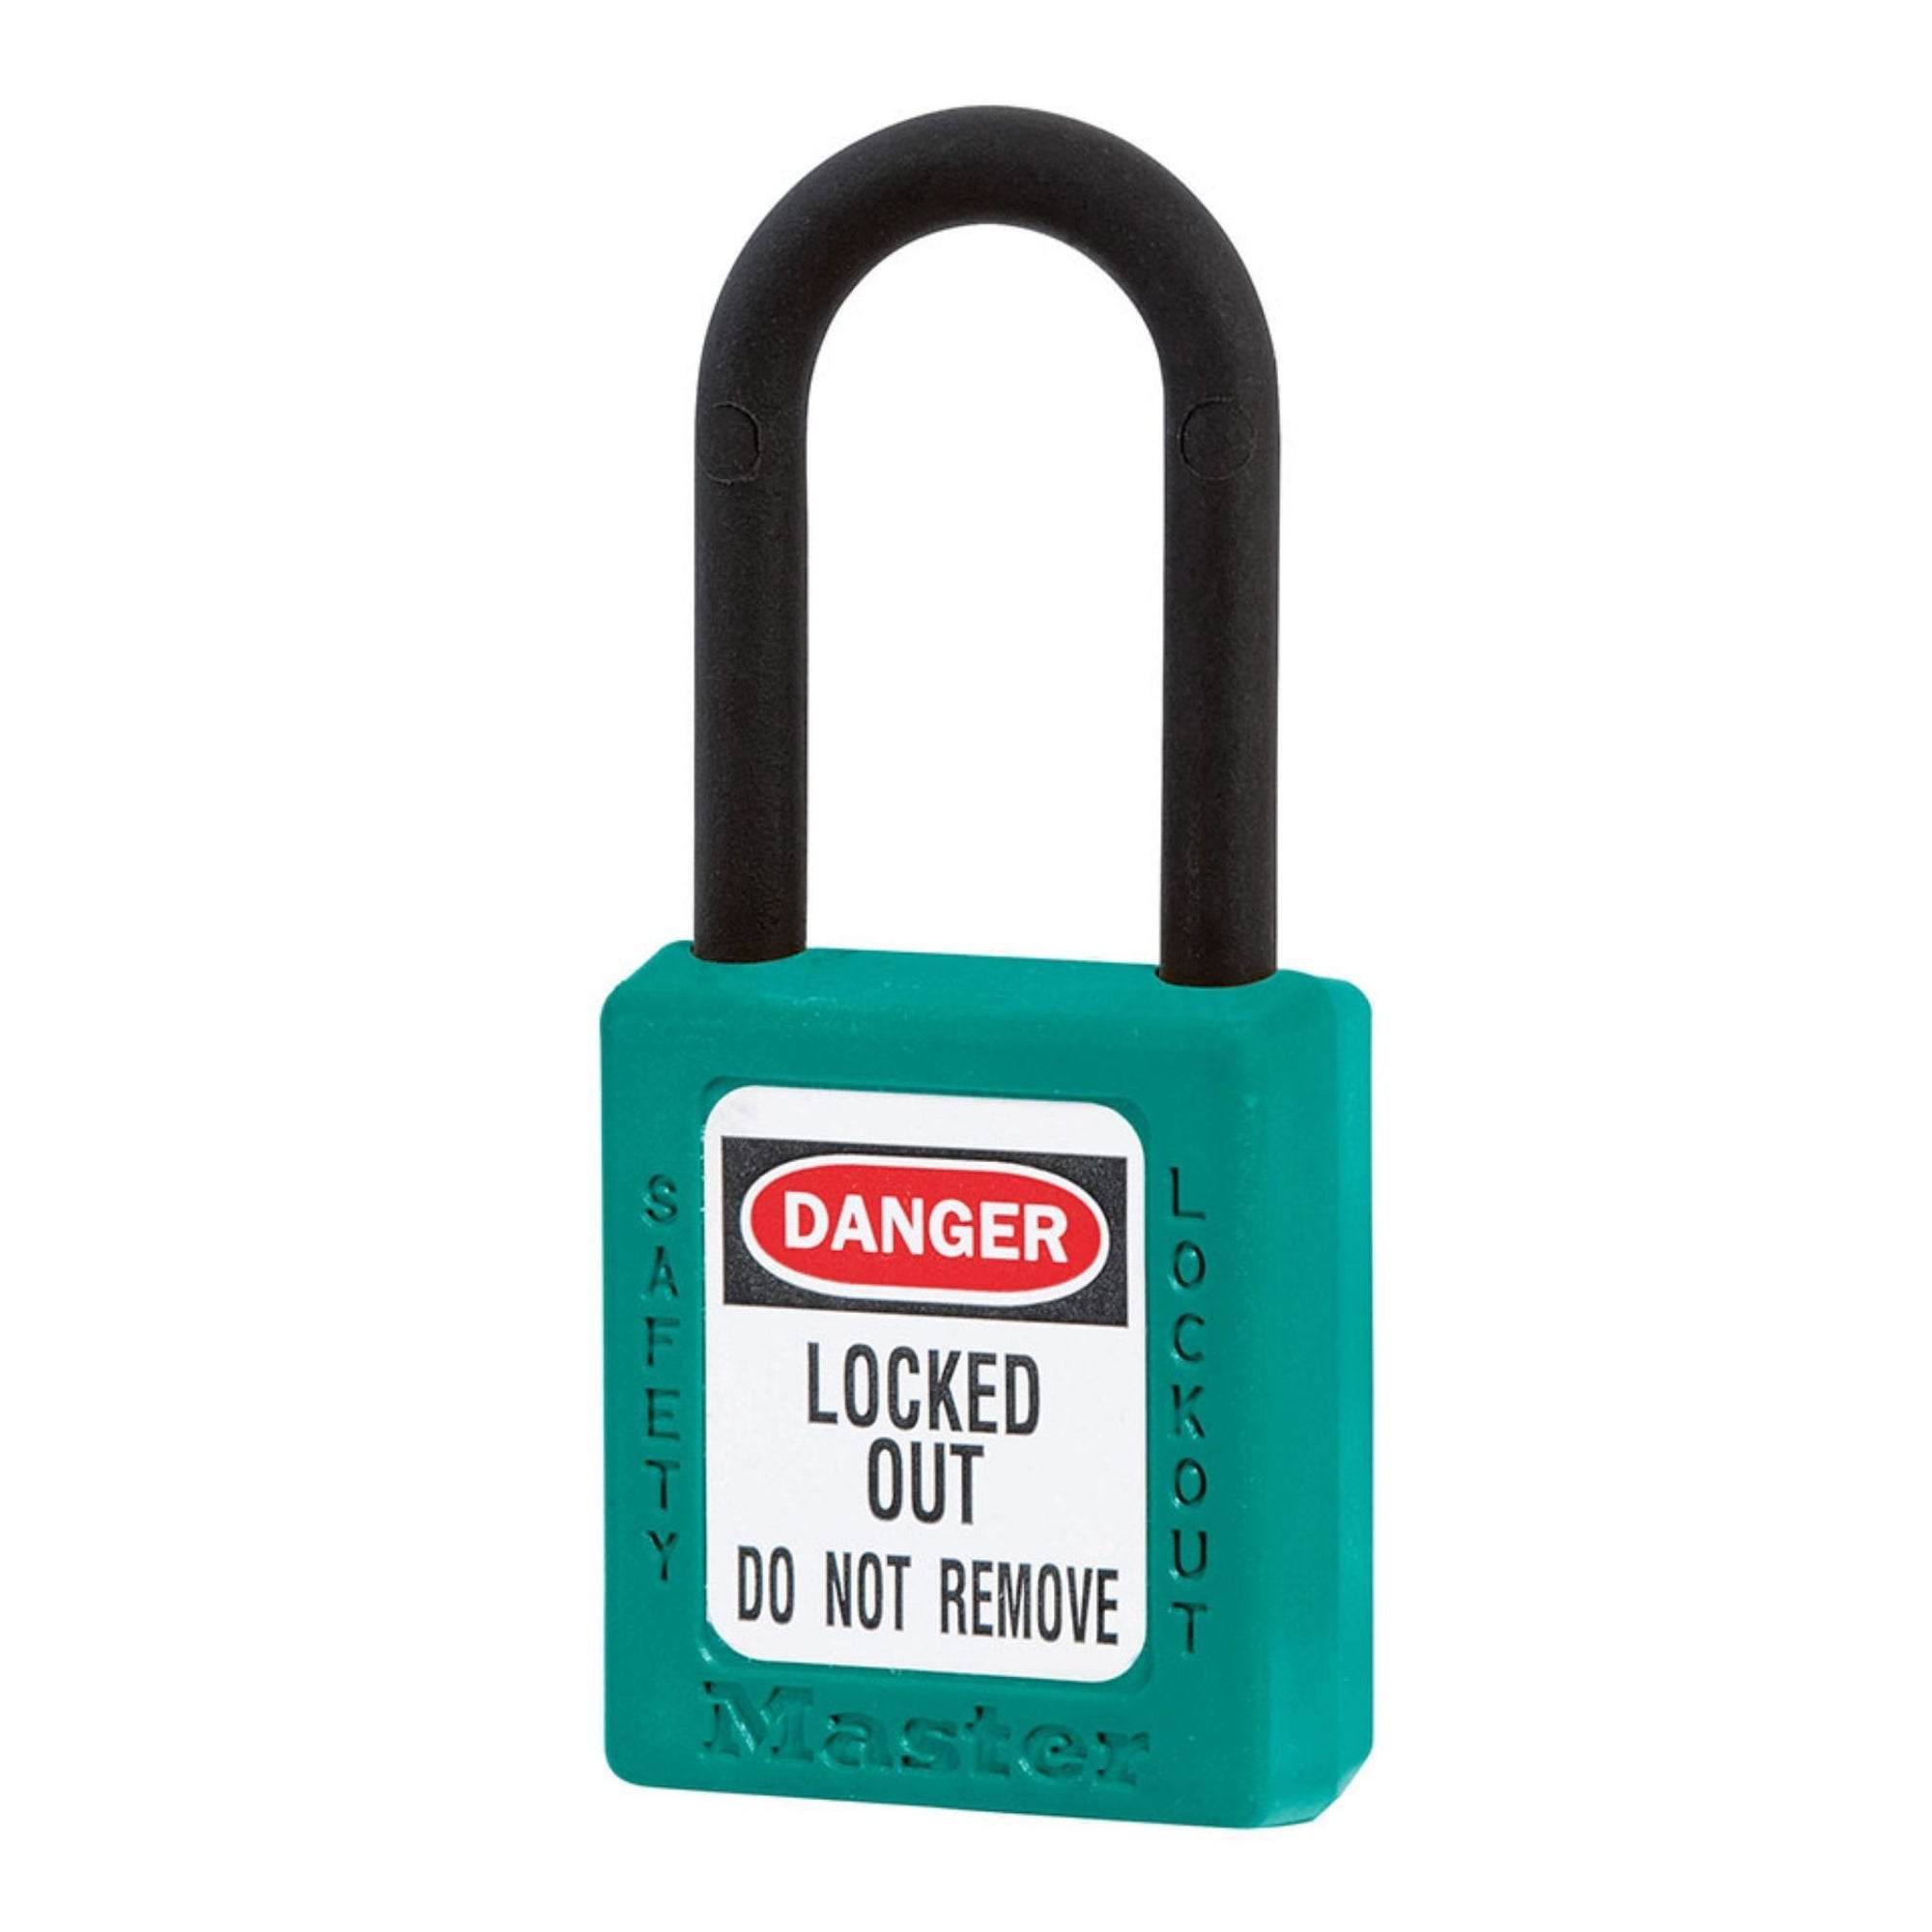 Master Lock 406TEAL Teal Zenex Safety Padlock with Nylon Covered Shackle - The Lock Source